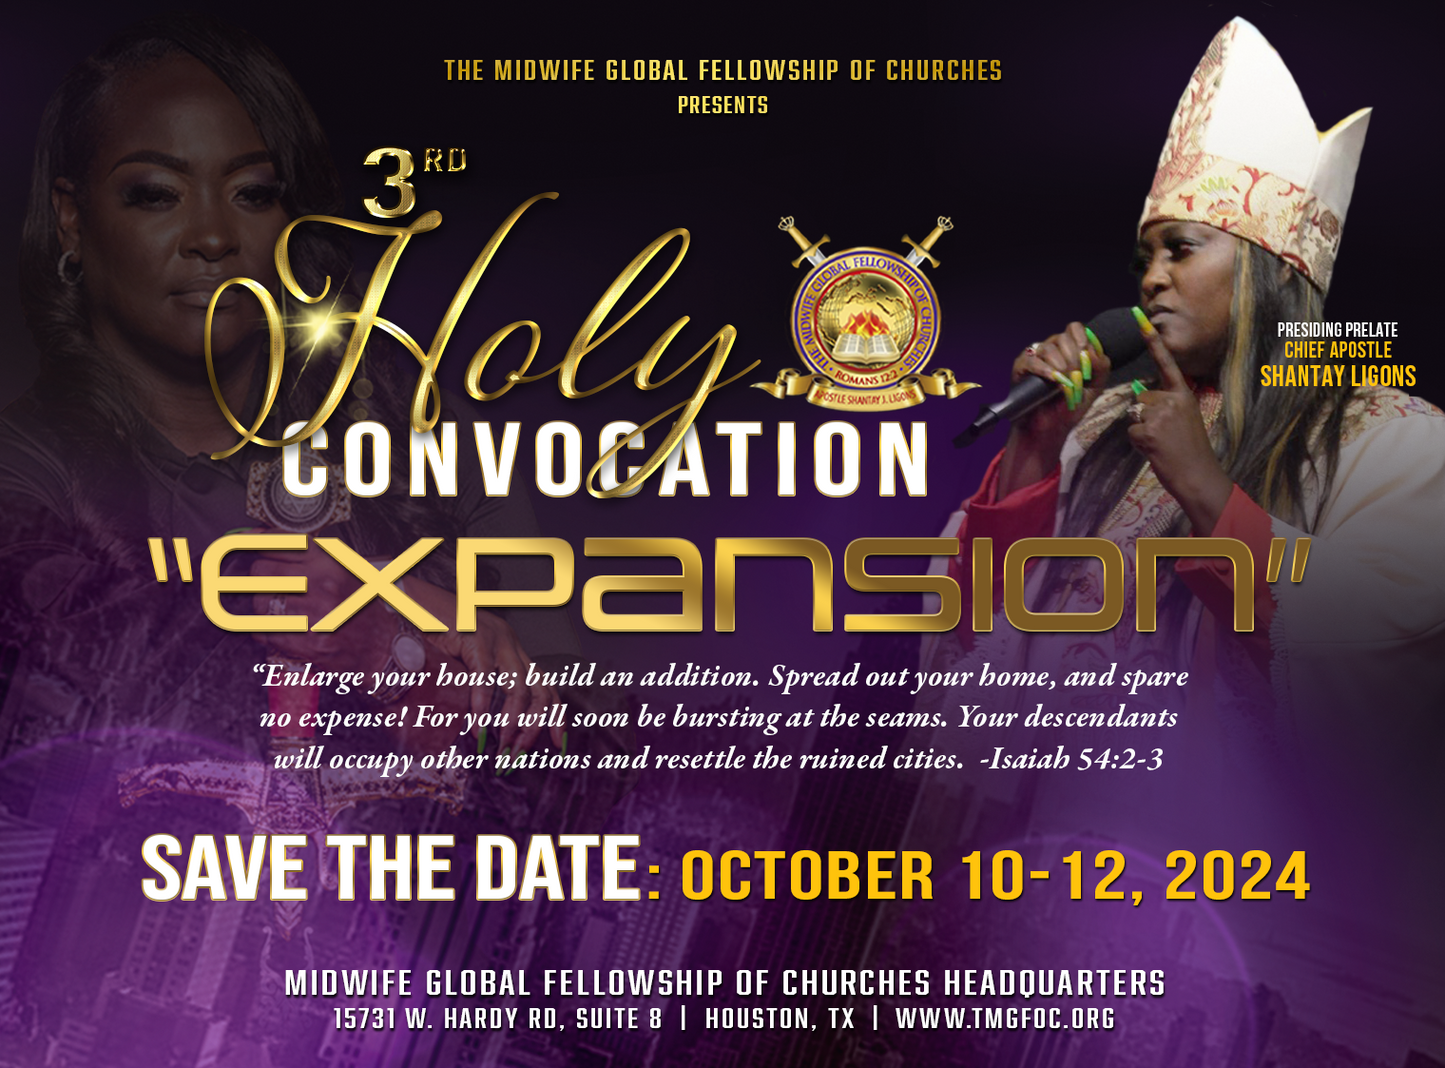 3rd Annual Holy Convocation